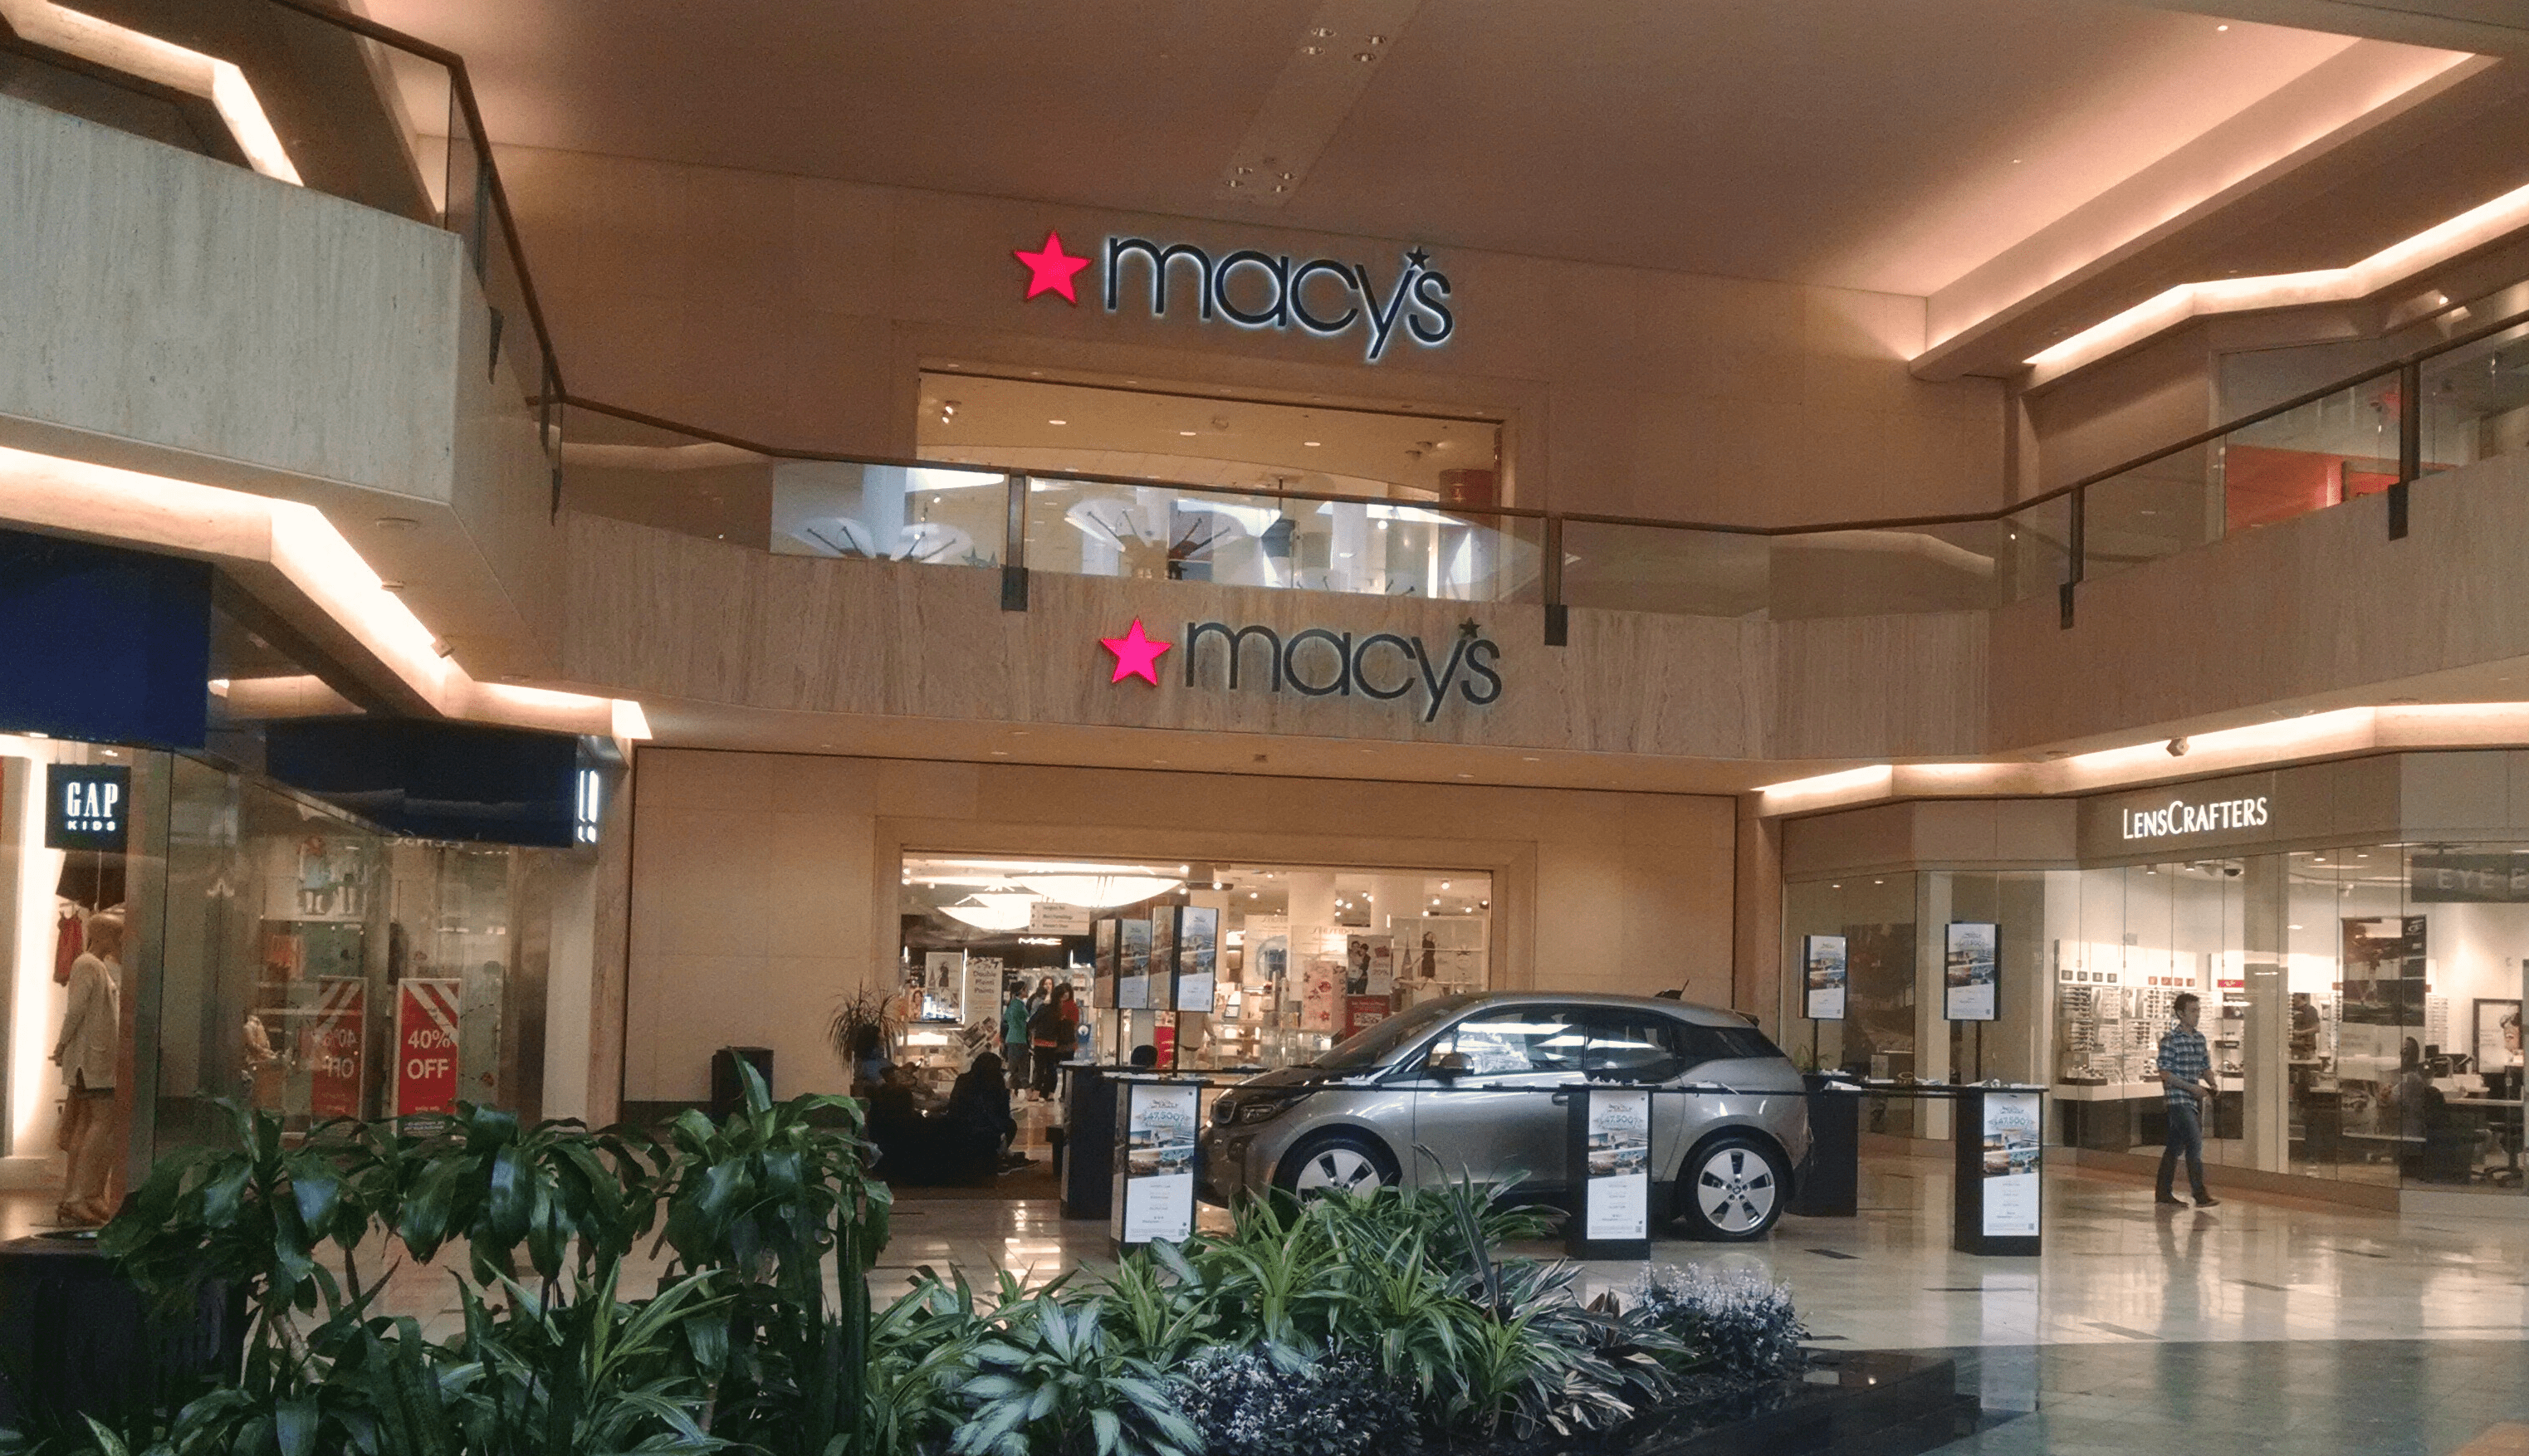 Tax assessments have fallen for the Macy's property at Schaumburg's Woodfield Mall, meaning more of the community's property tax burden will spread elsewhere.